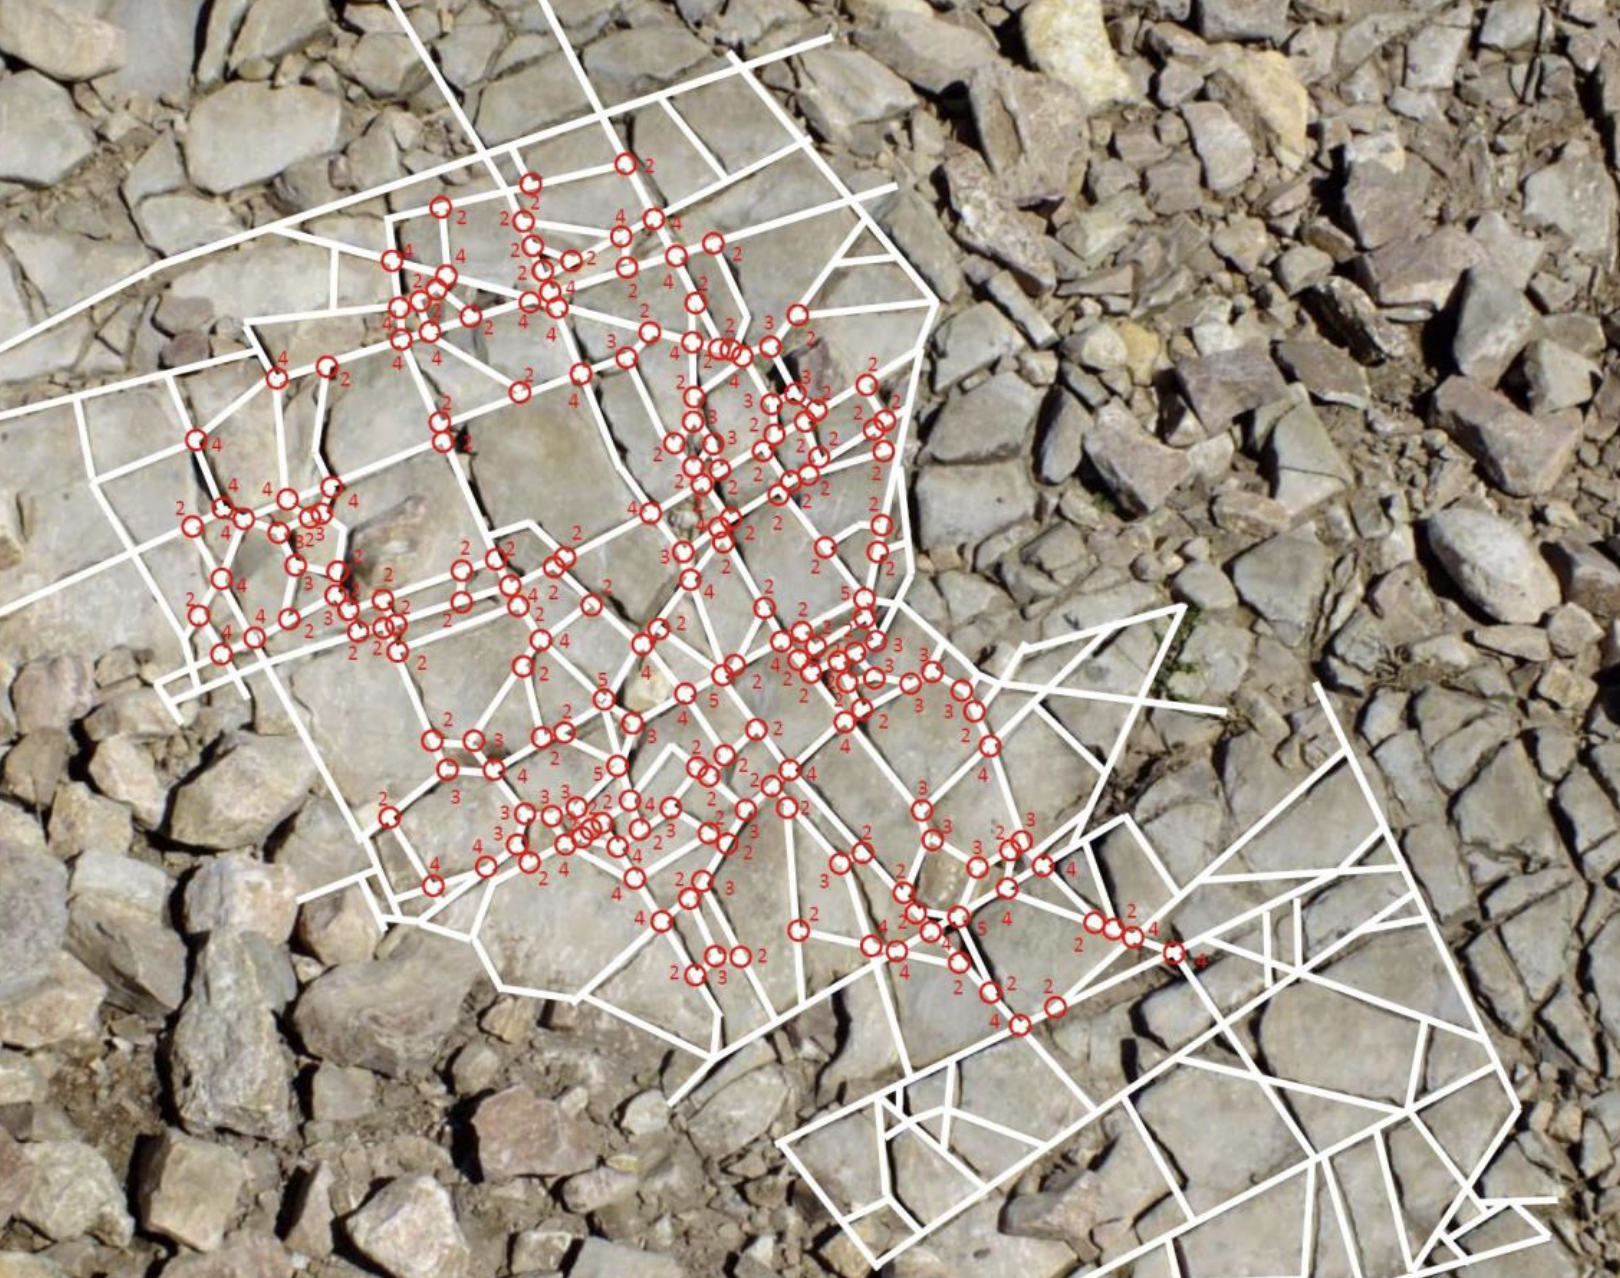 Photo of rocks overlaid with white lines and red circles indicating their sides and vertices